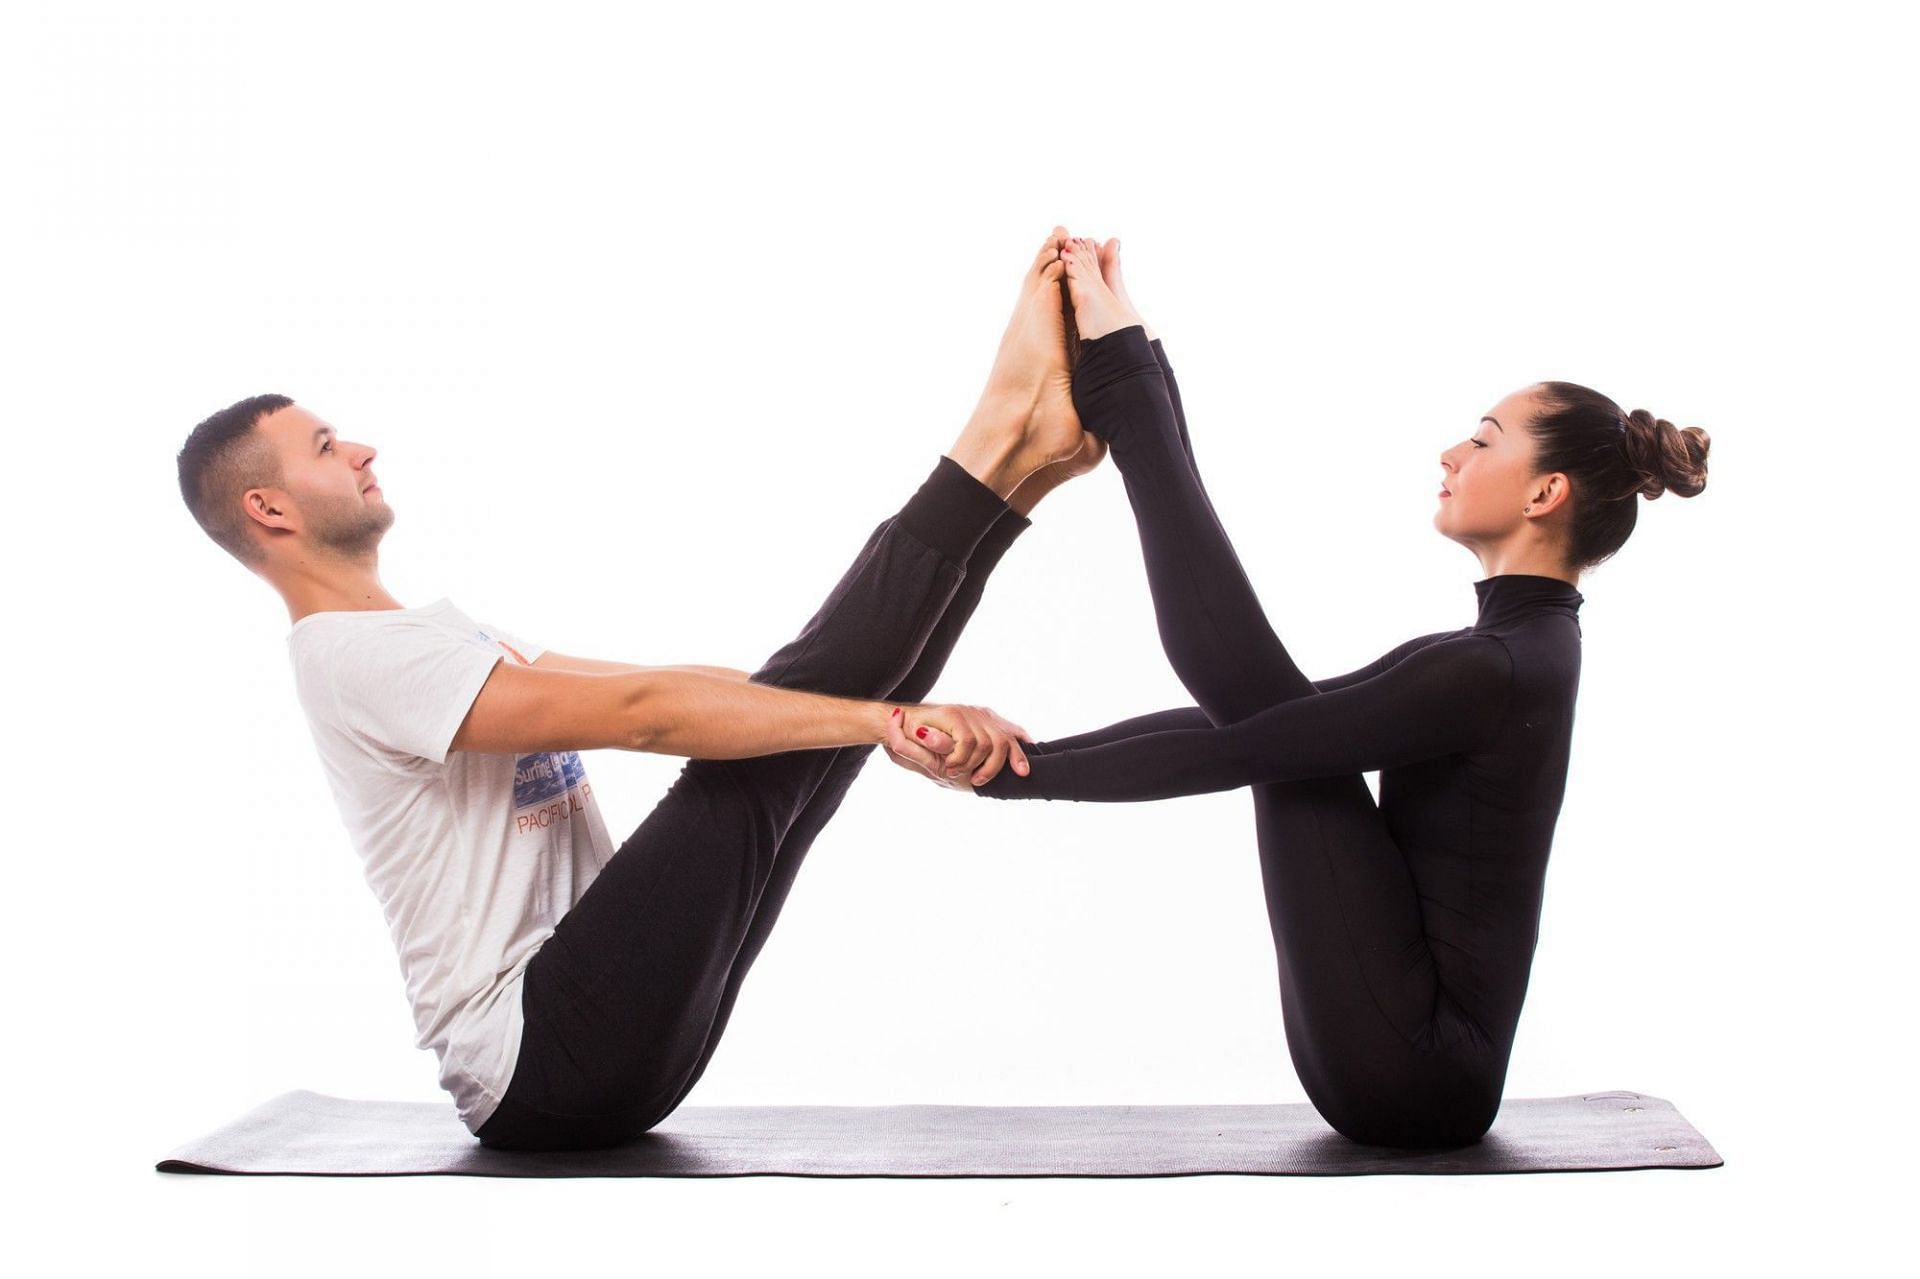 Have your tried couple yoga? - Complete Wellbeing